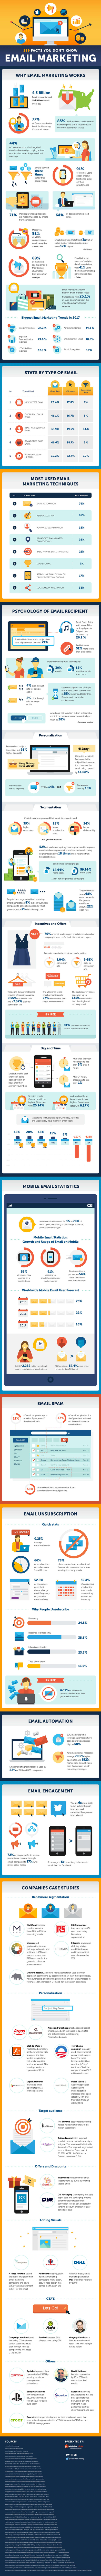 Email-Marketing-Facts(Infographic)